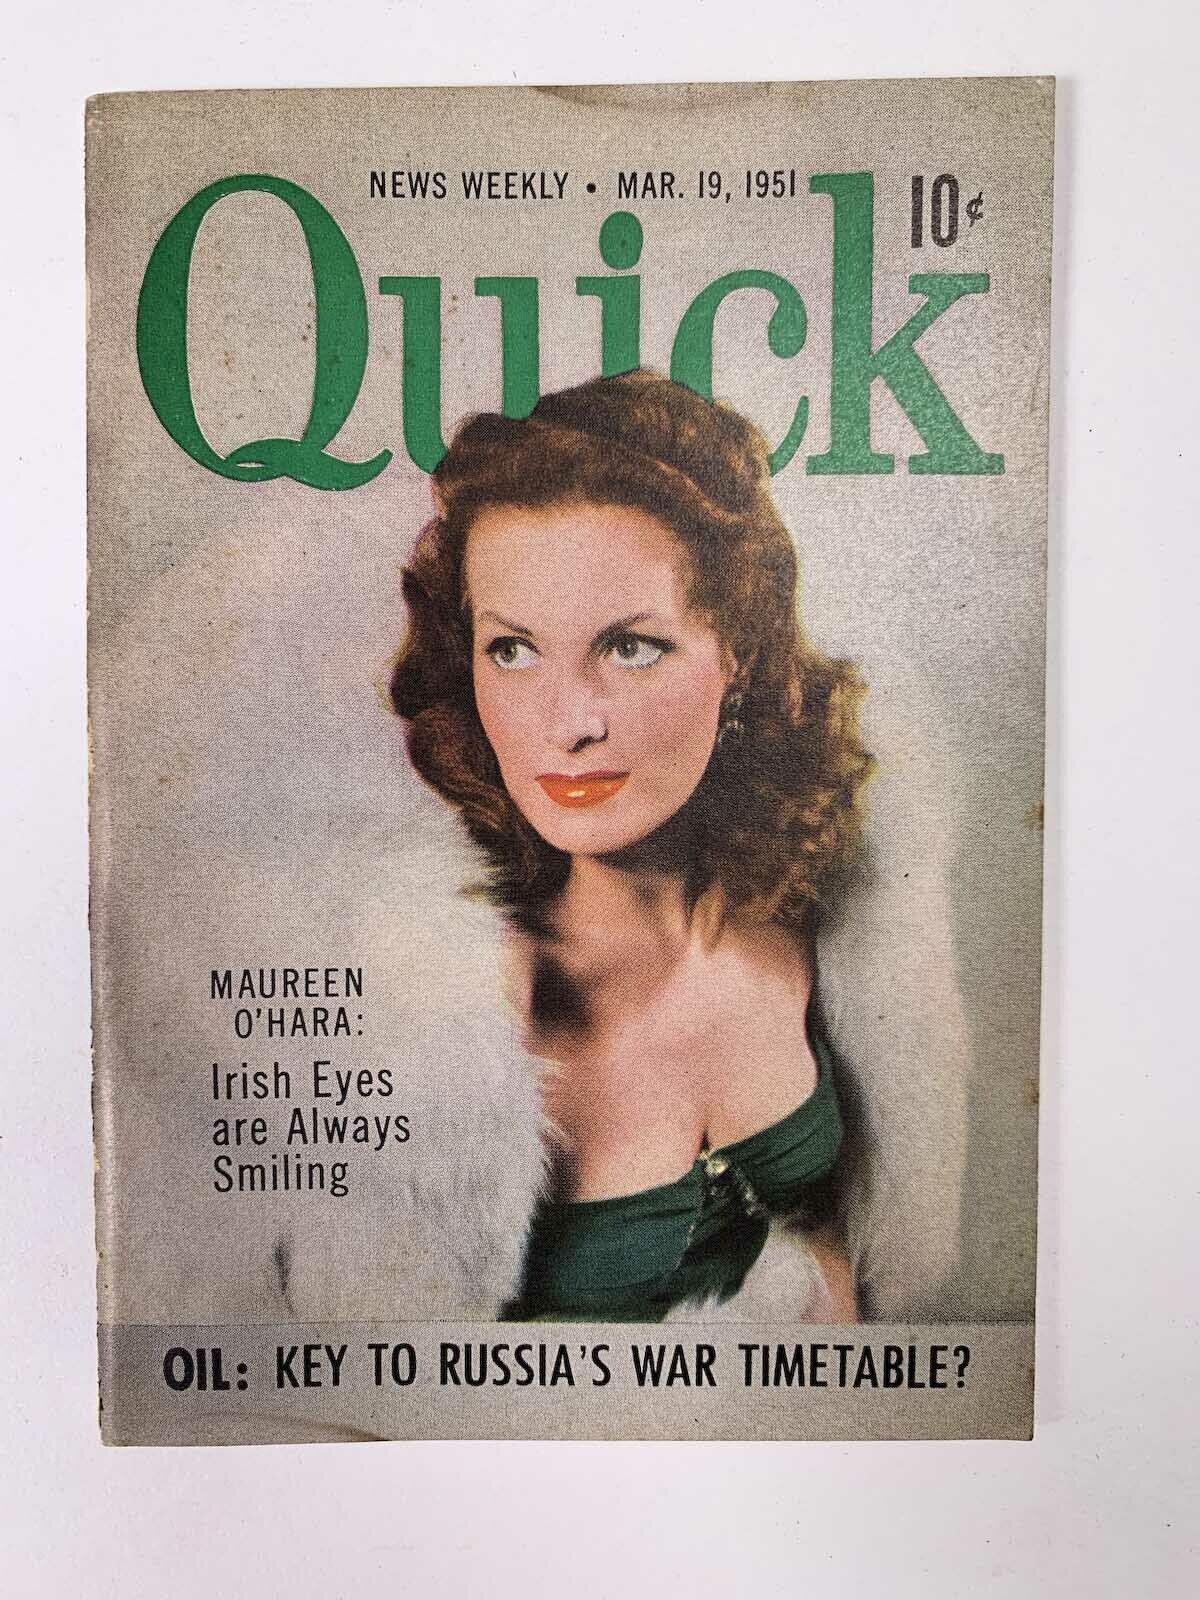 Quick News Weekly Magazine March 19 1951 cover Maureen O'Hara